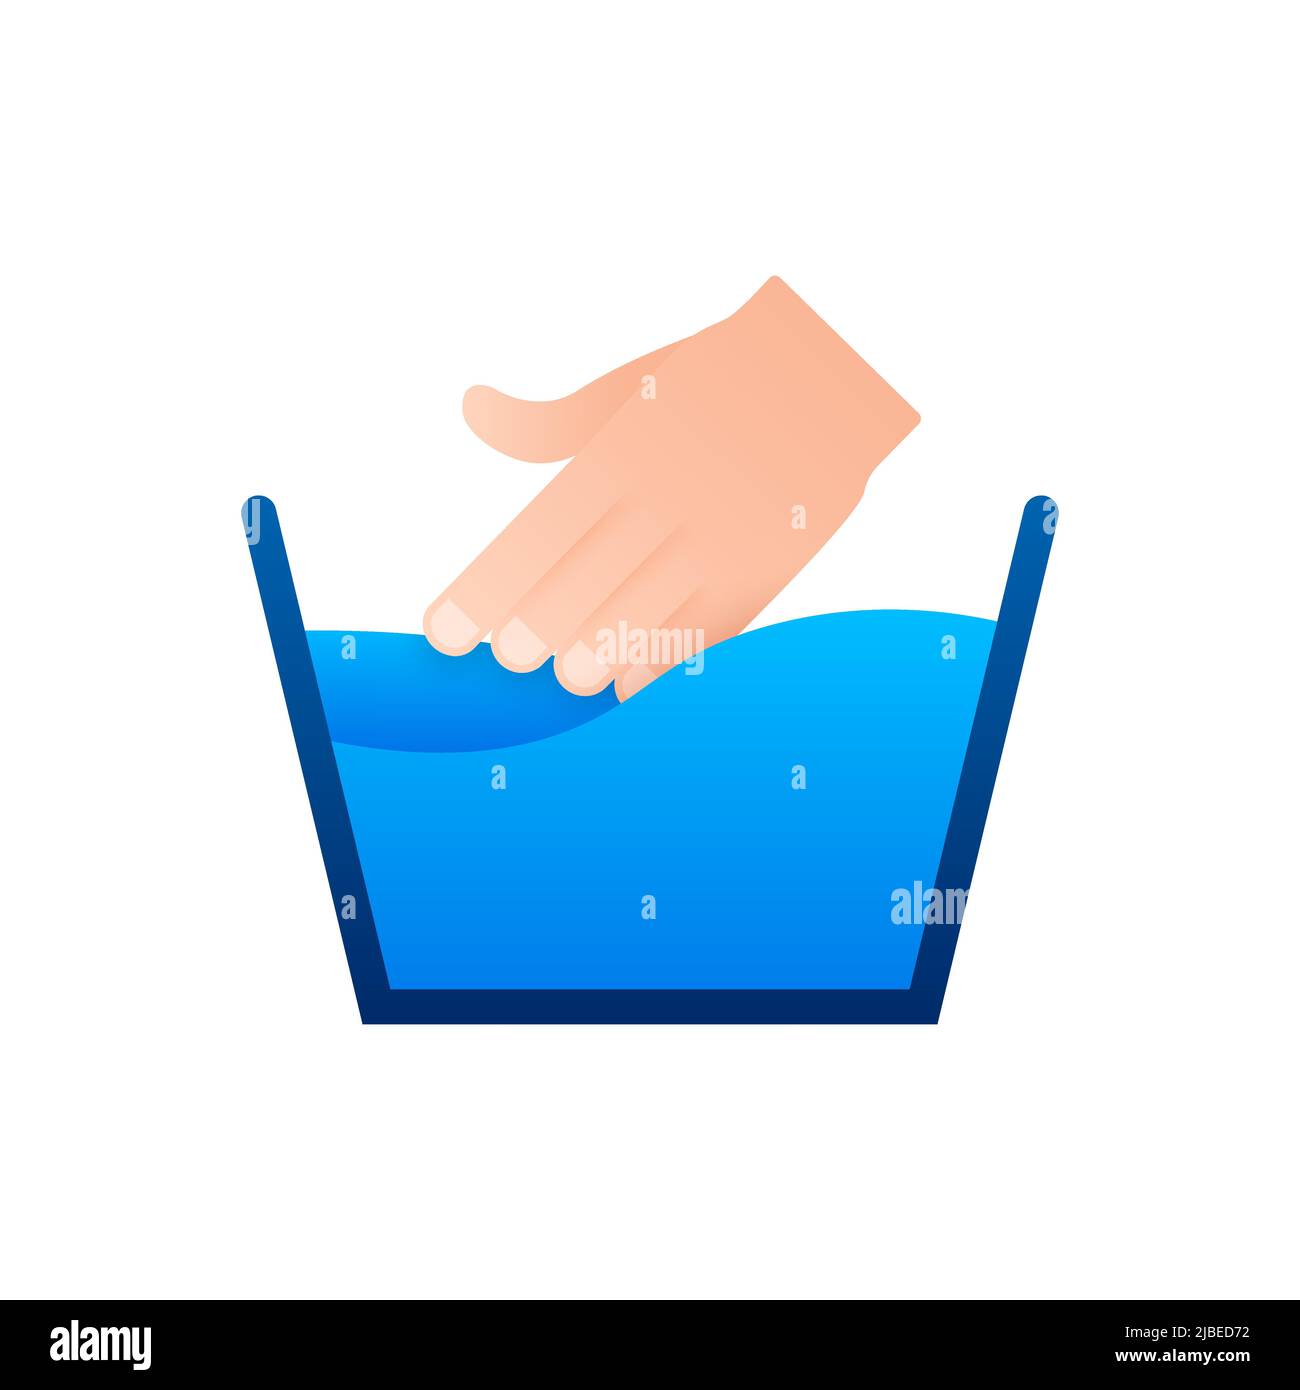 Washing hands. Flat style icon on white background Stock Vector